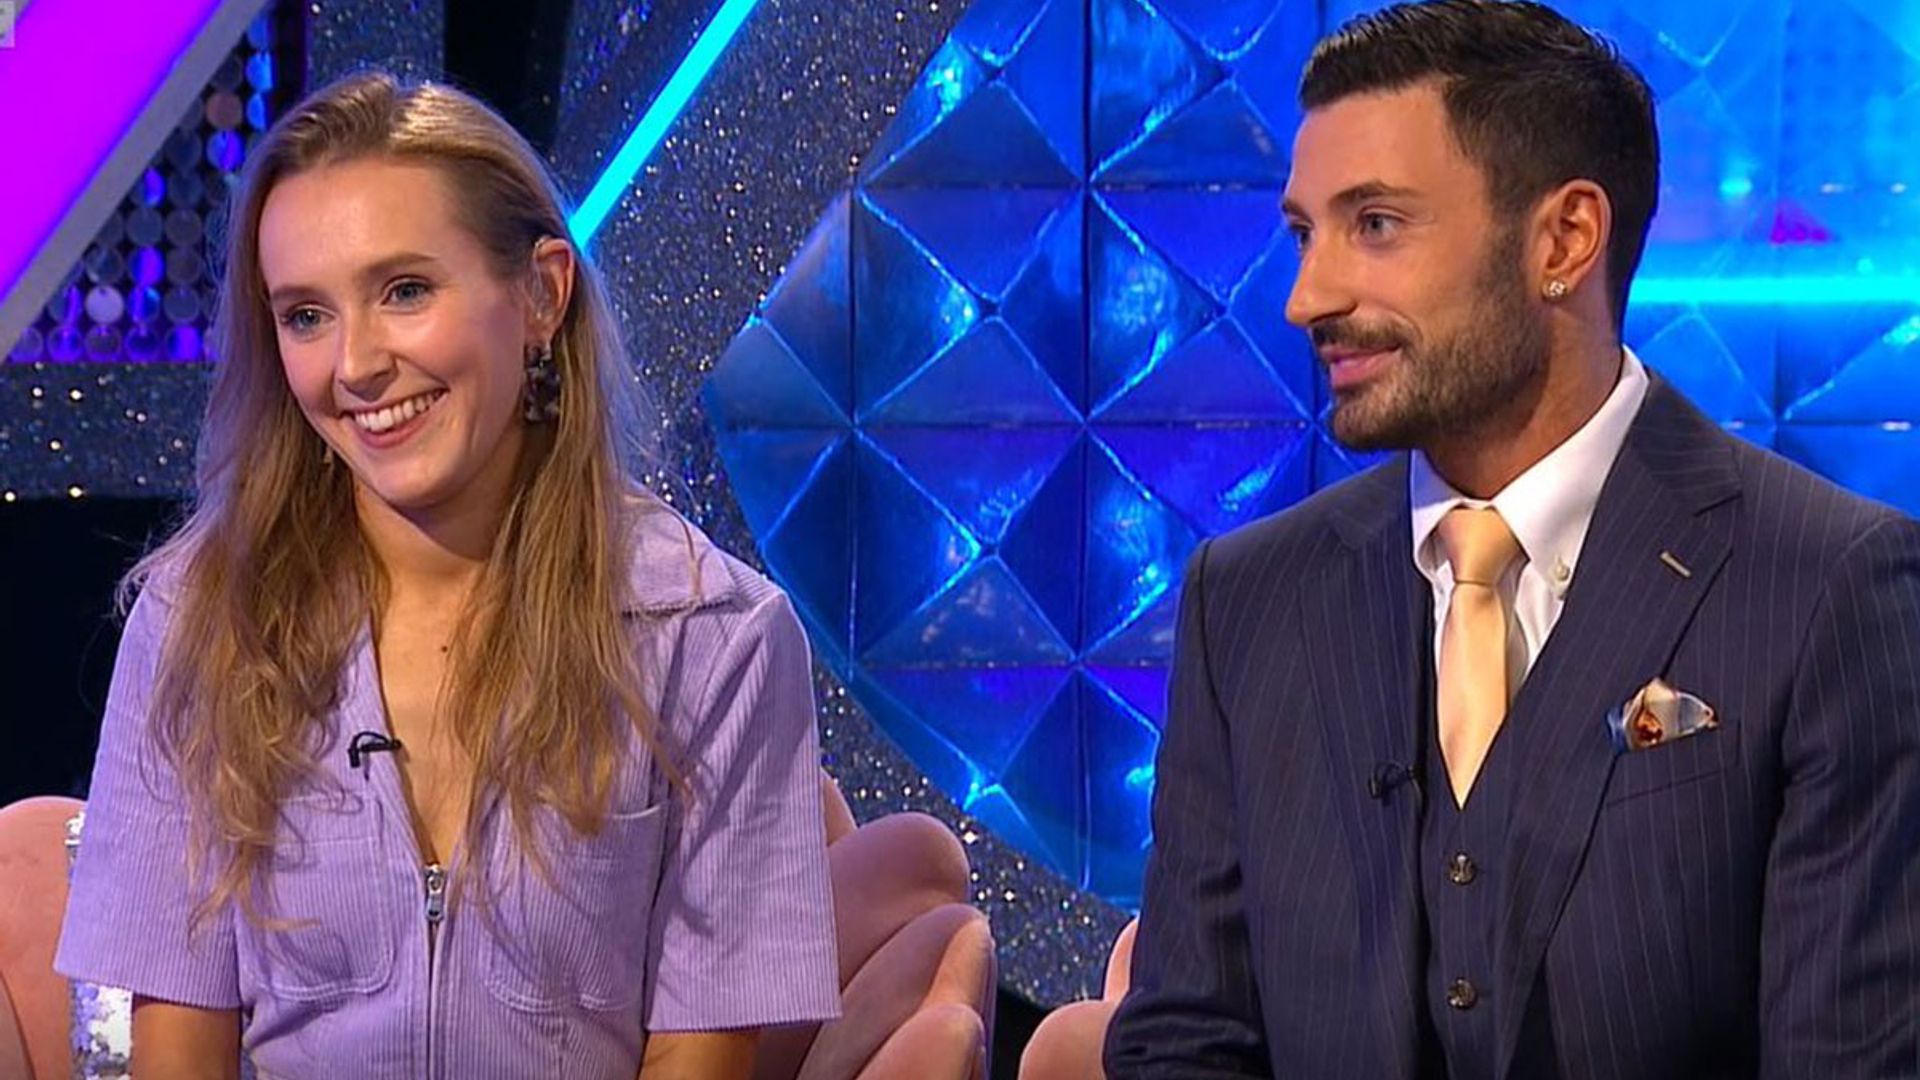 Strictly's Rose Ayling-Ellis put on the spot after she's asked which pro dancer she would pick over Giovanni Pernice